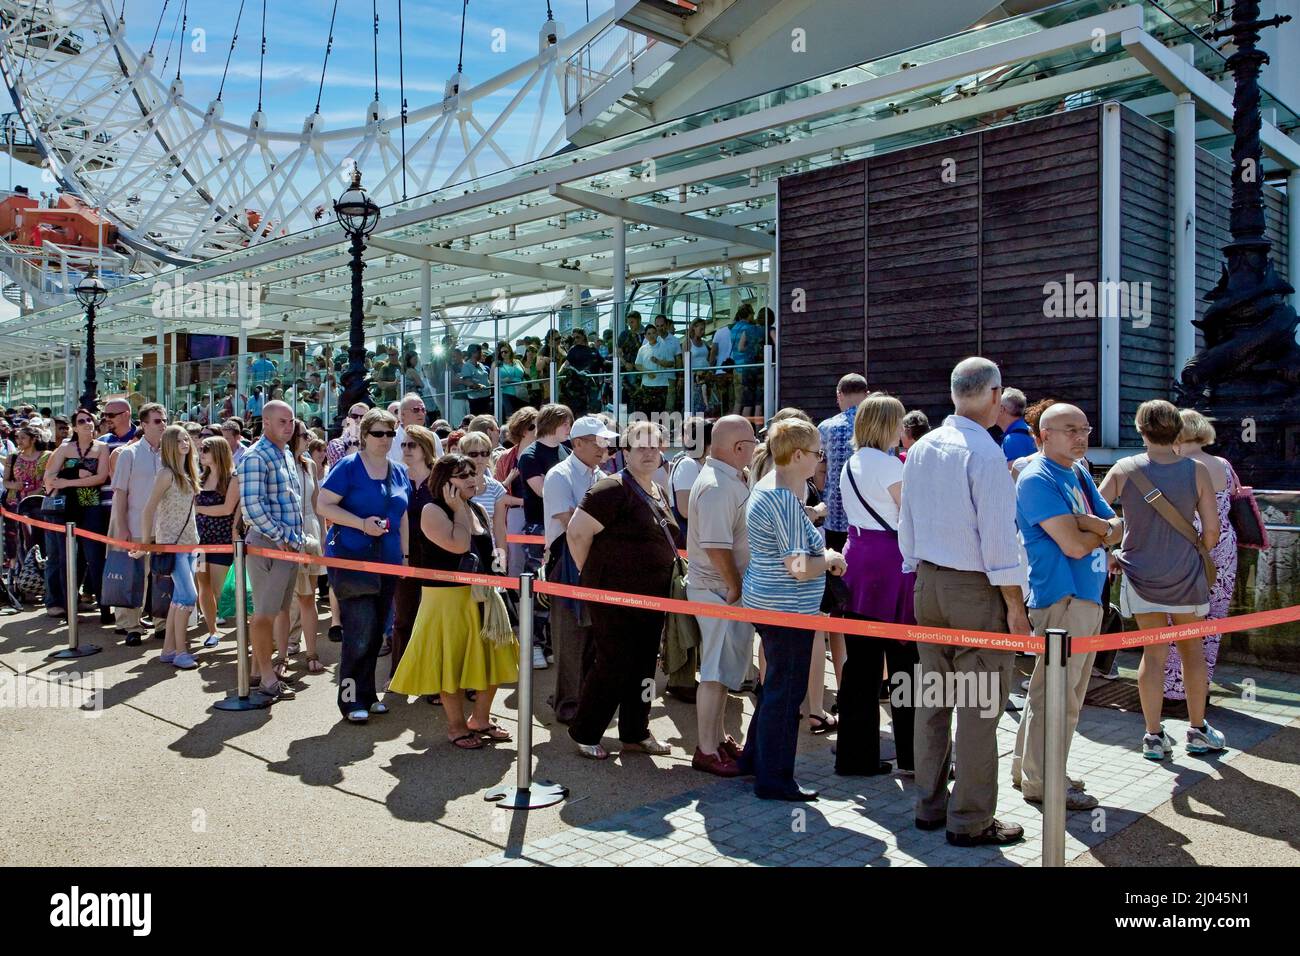 Long Queue, England High Resolution Stock Photography and Images - Alamy